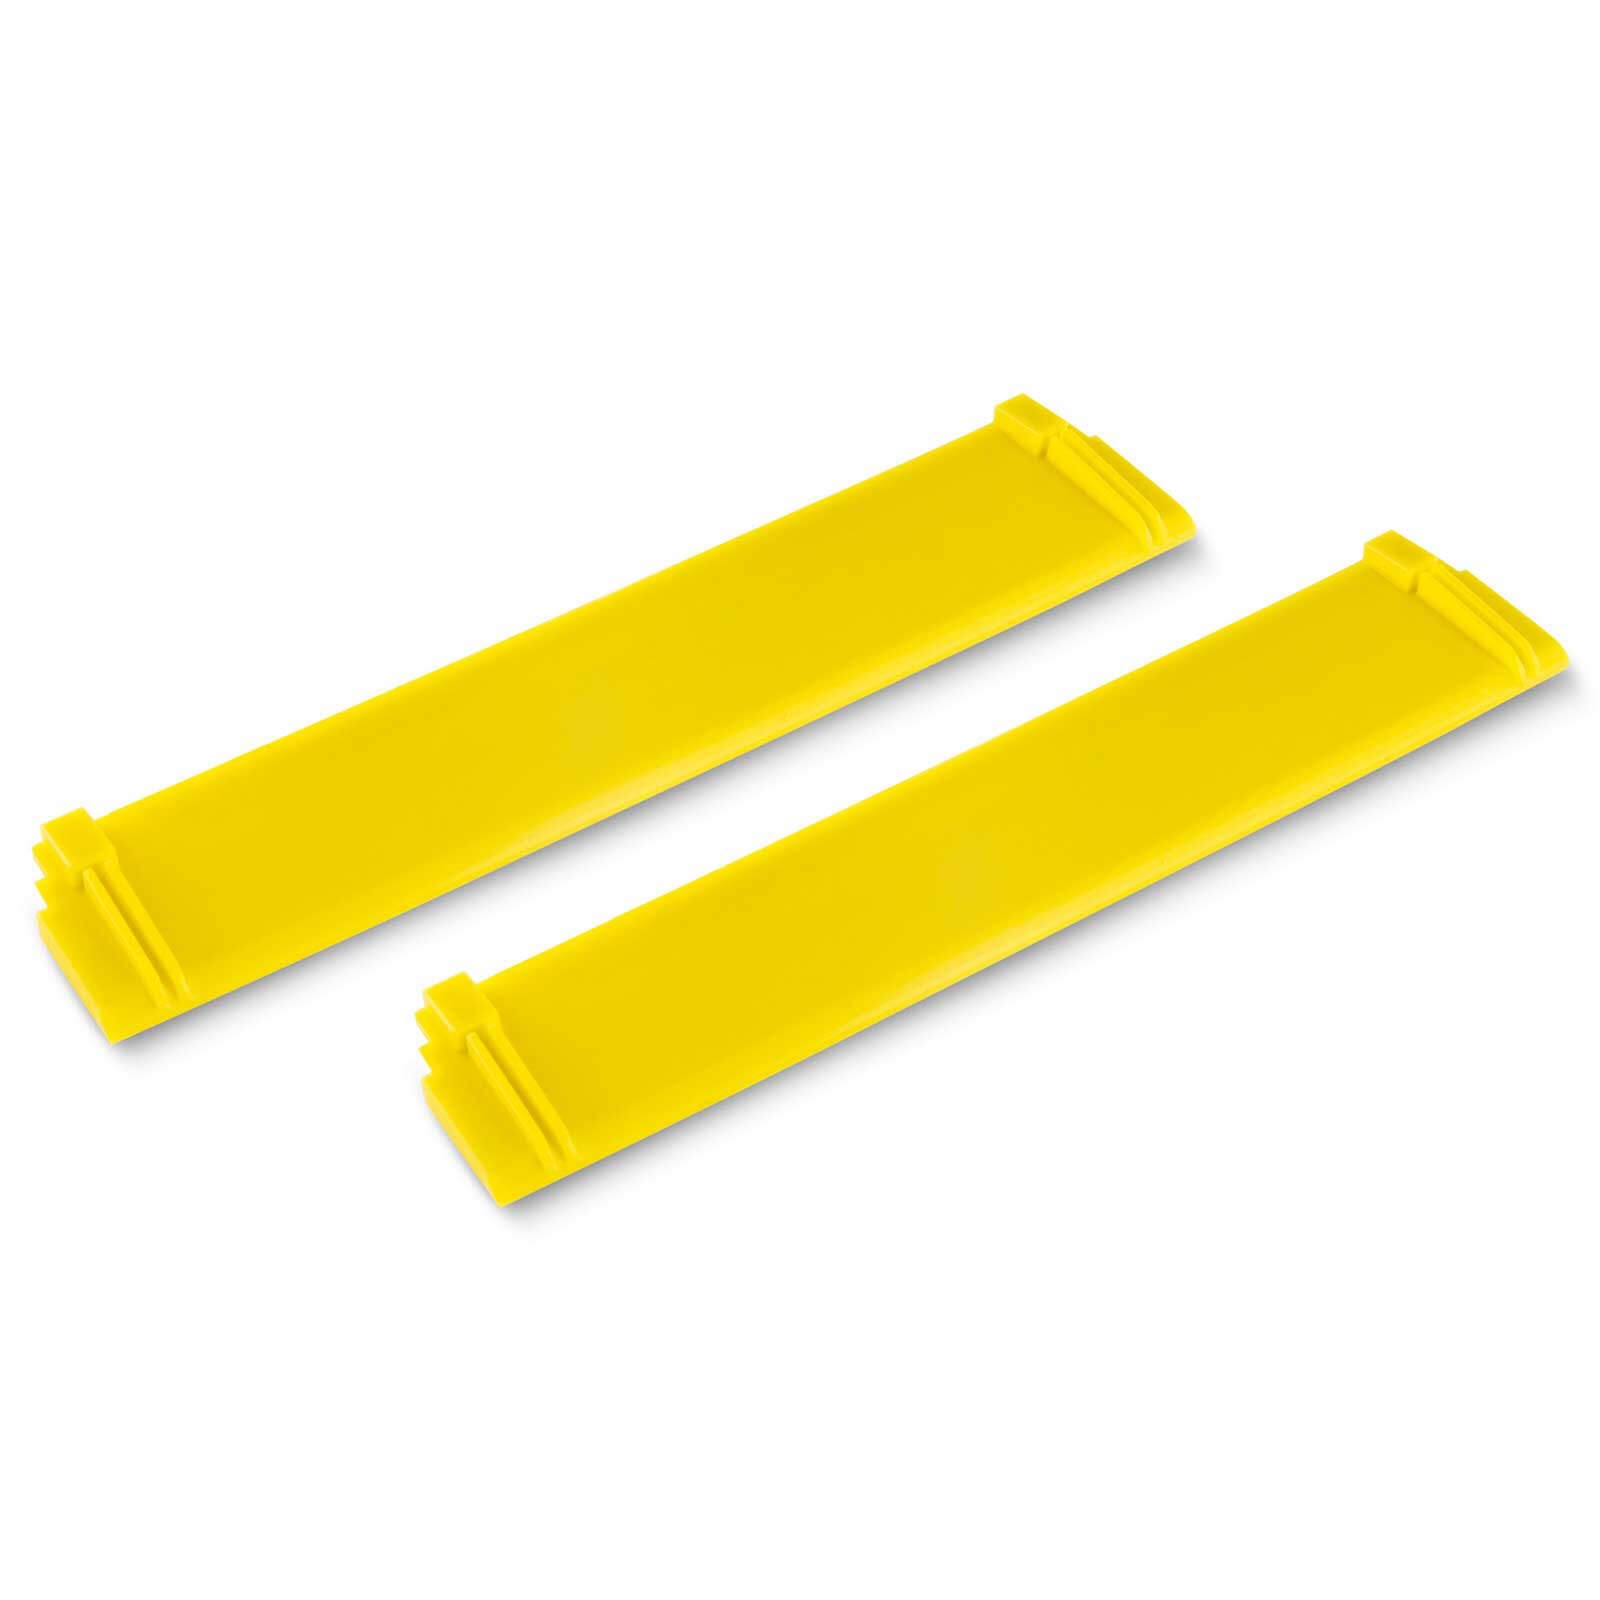 Karcher Suction Lips 170mm for WV 6 Window Vacs Pack of 2